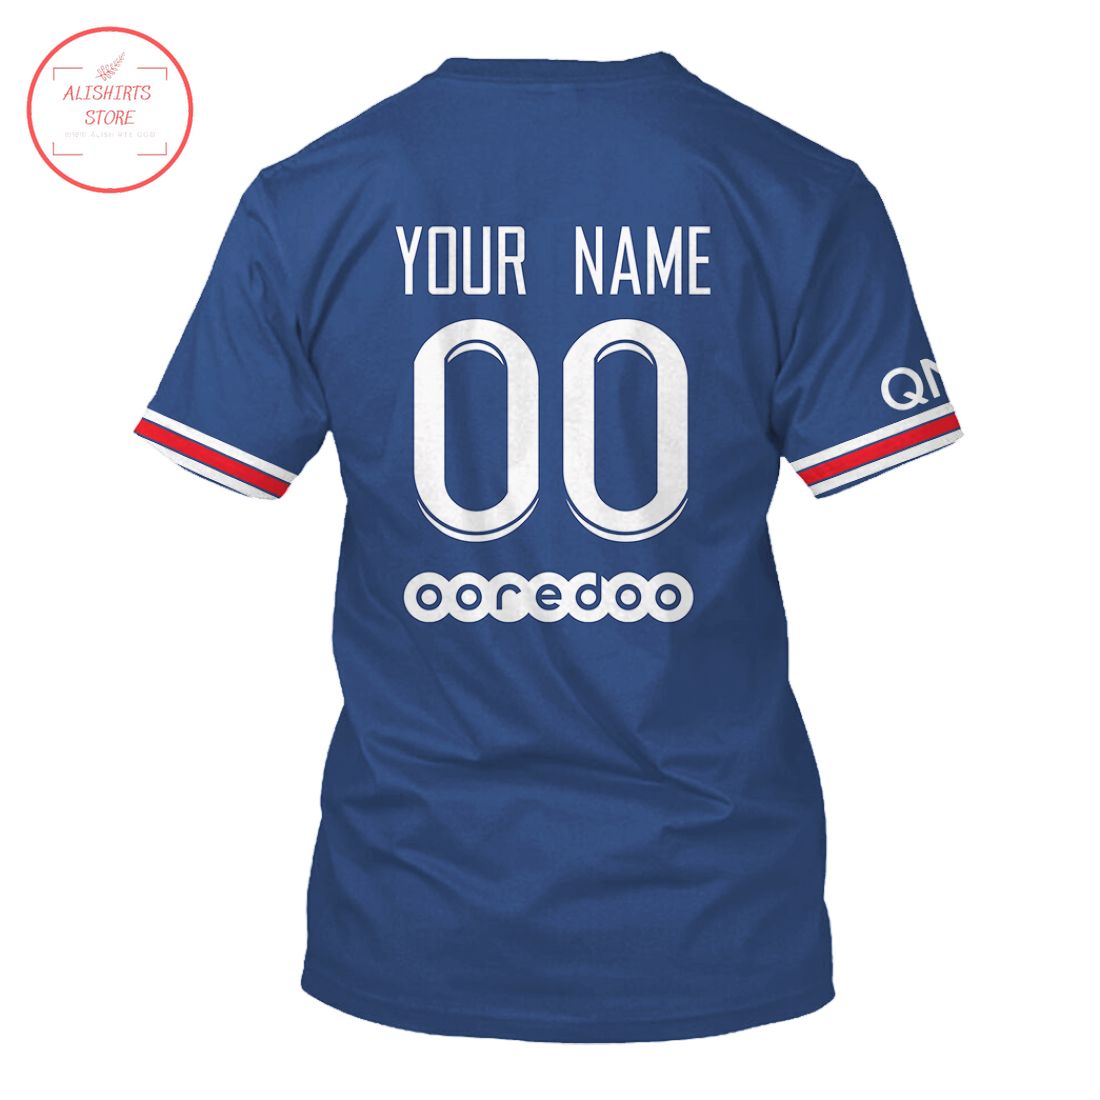 Paris Saint Germain fc Home and Away Personalized 3D Shirts